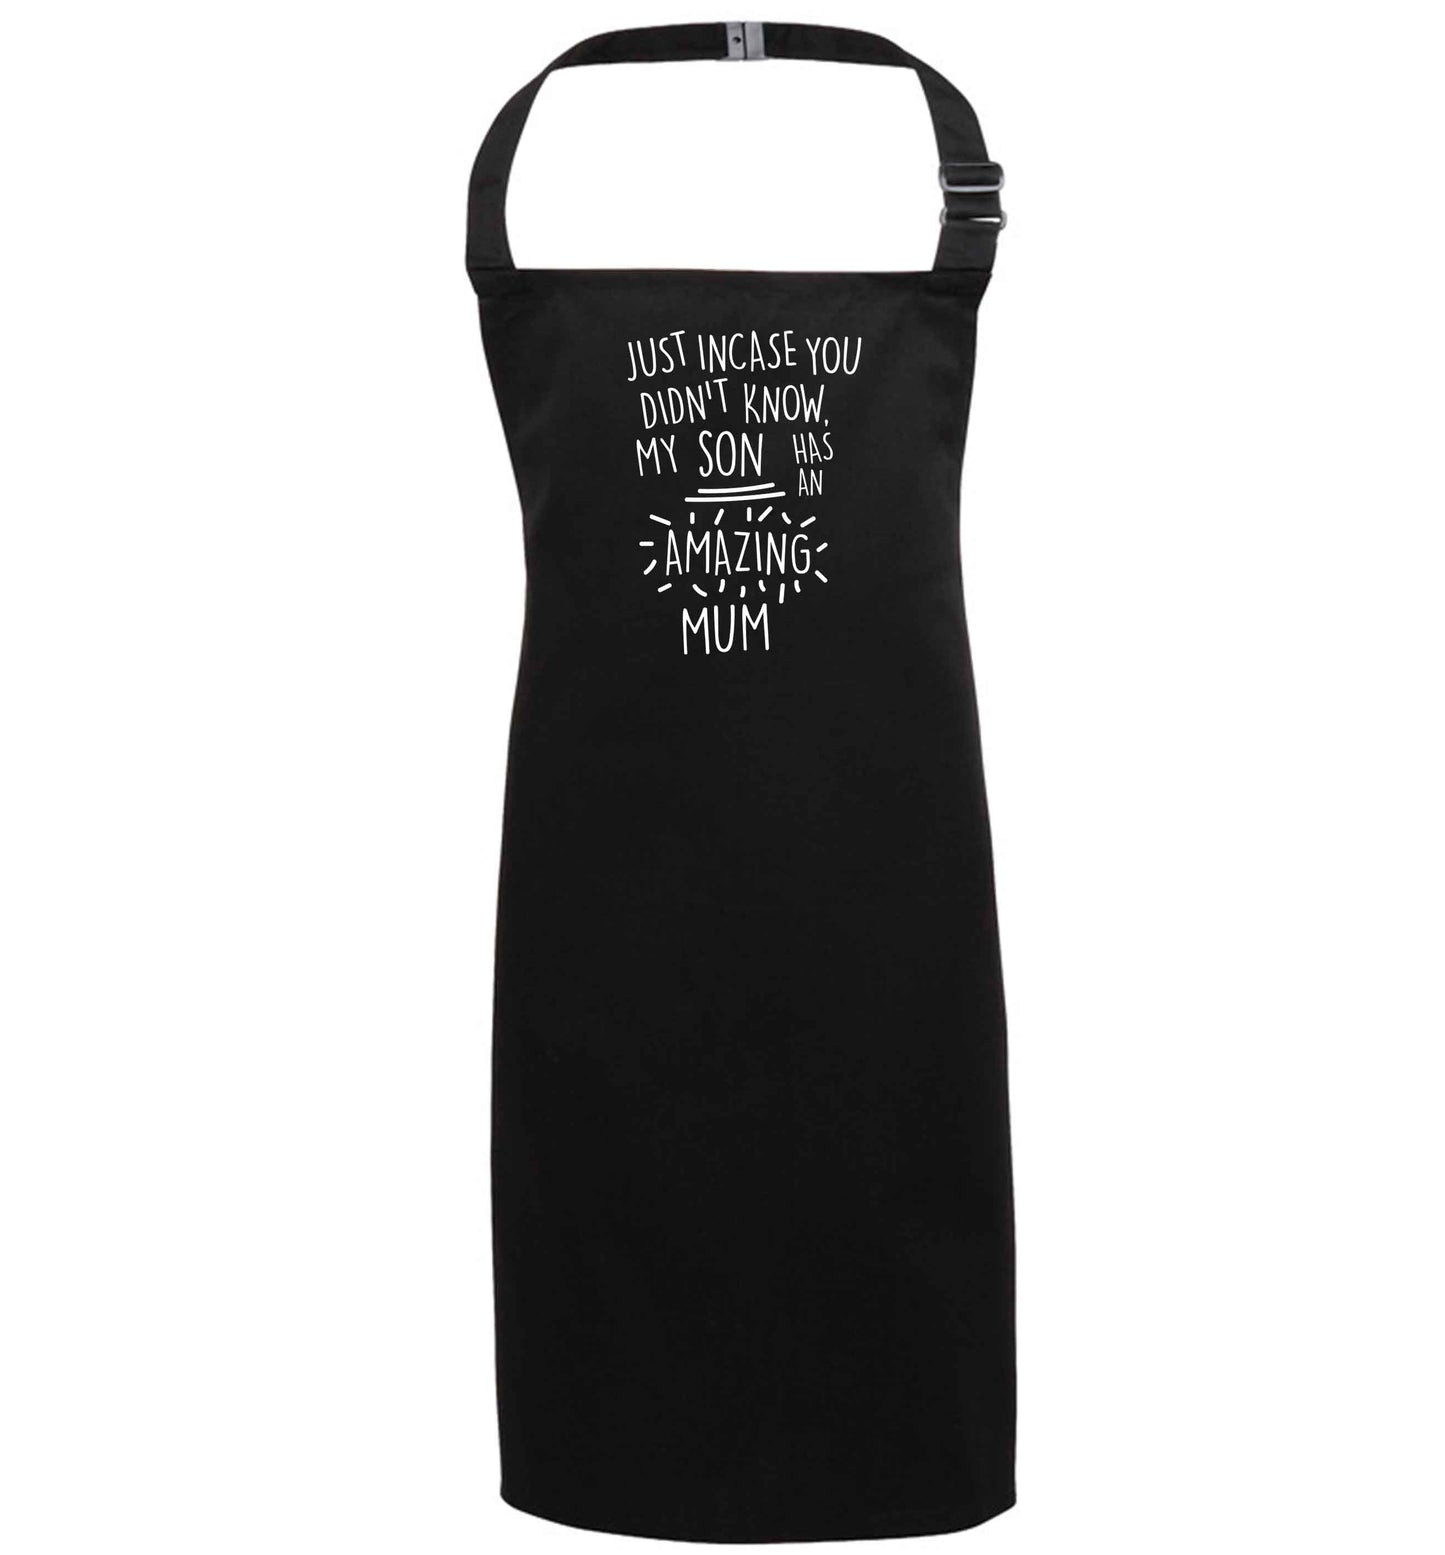 Just incase you didn't know my son has an amazing mum black apron 7-10 years